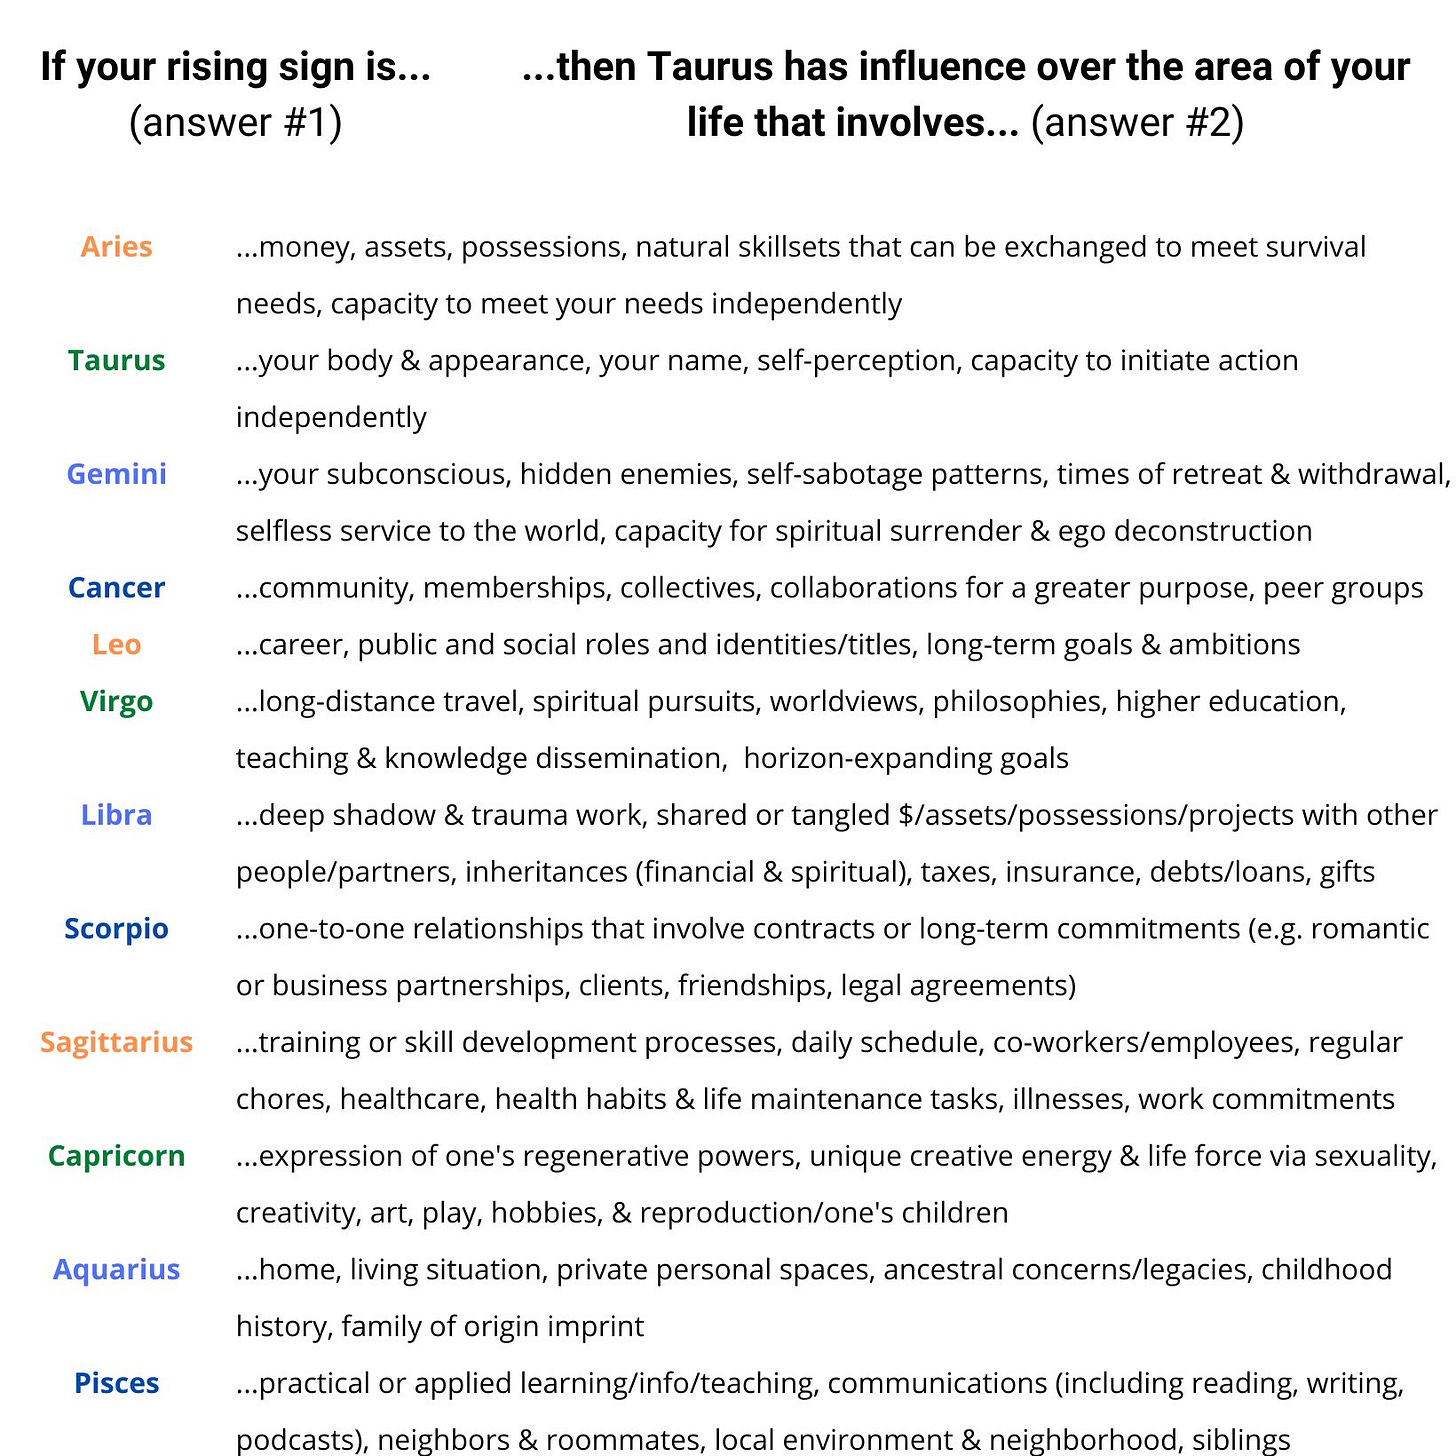 A table matching all 12 rising signs to keywords describing their Taurus house